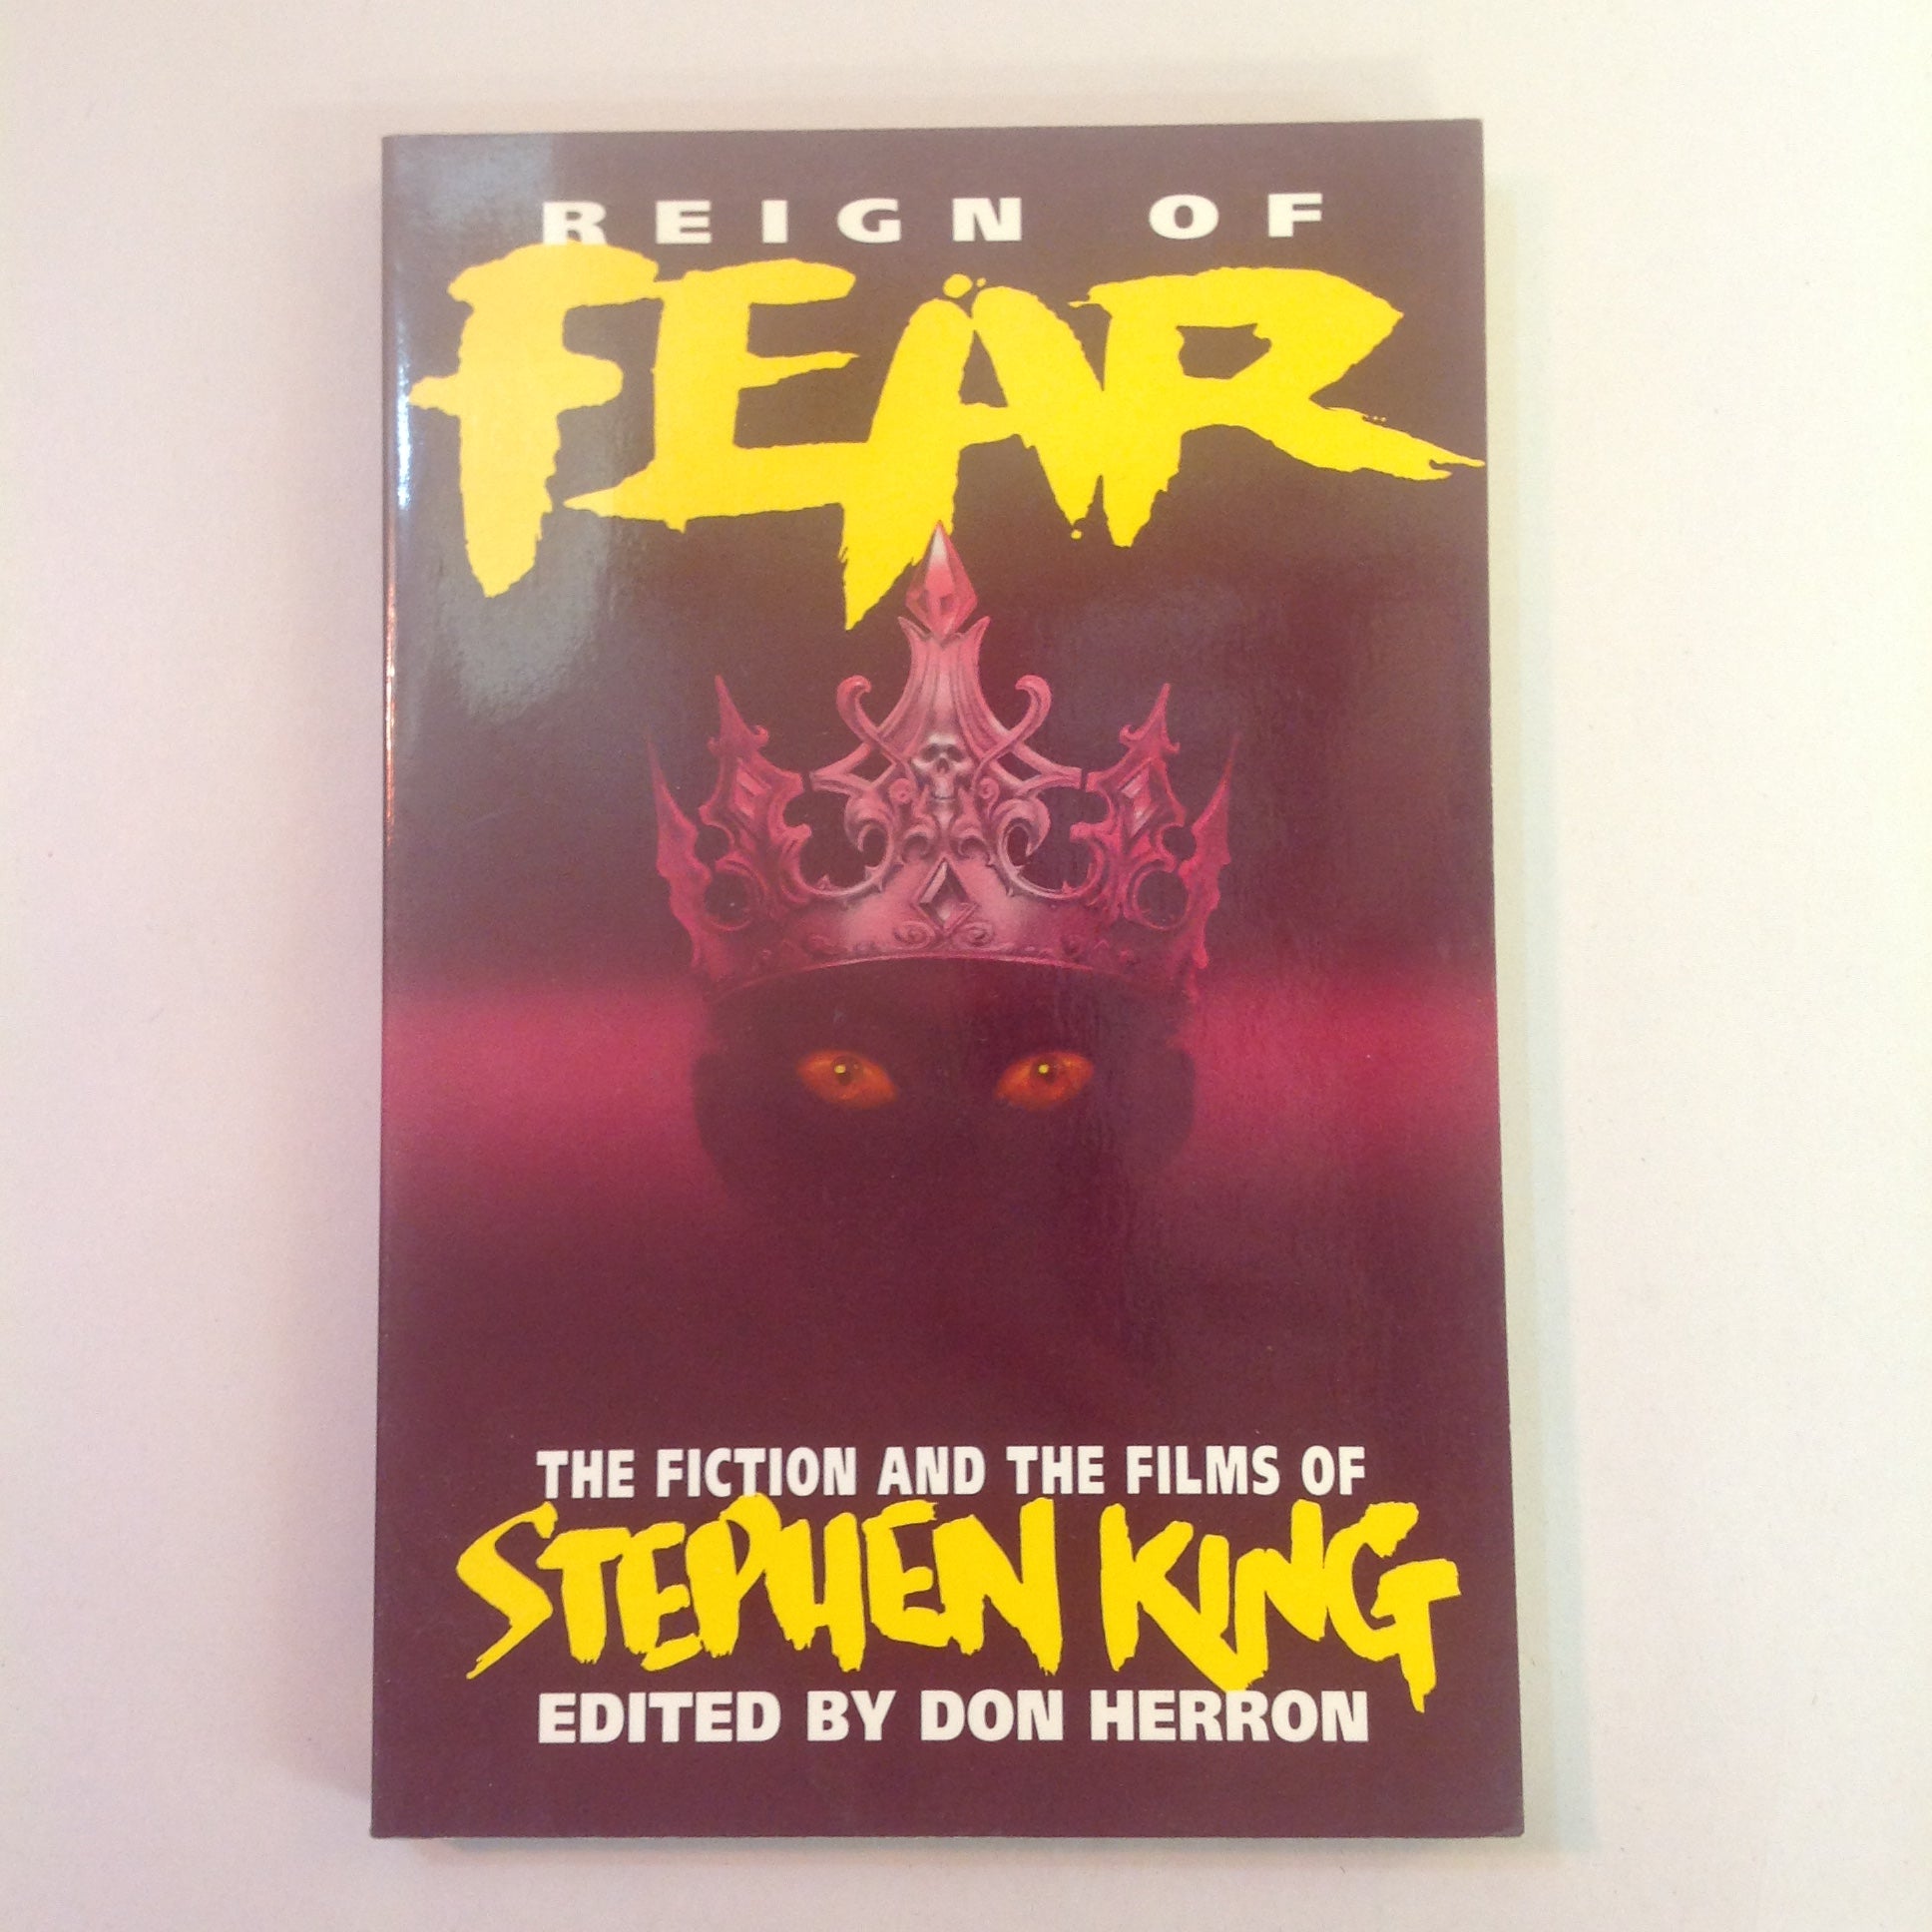 Vintage 1992 Trade Paperback Reign of Fear: The Fiction and Films of Stephen King Don Herron, Editor